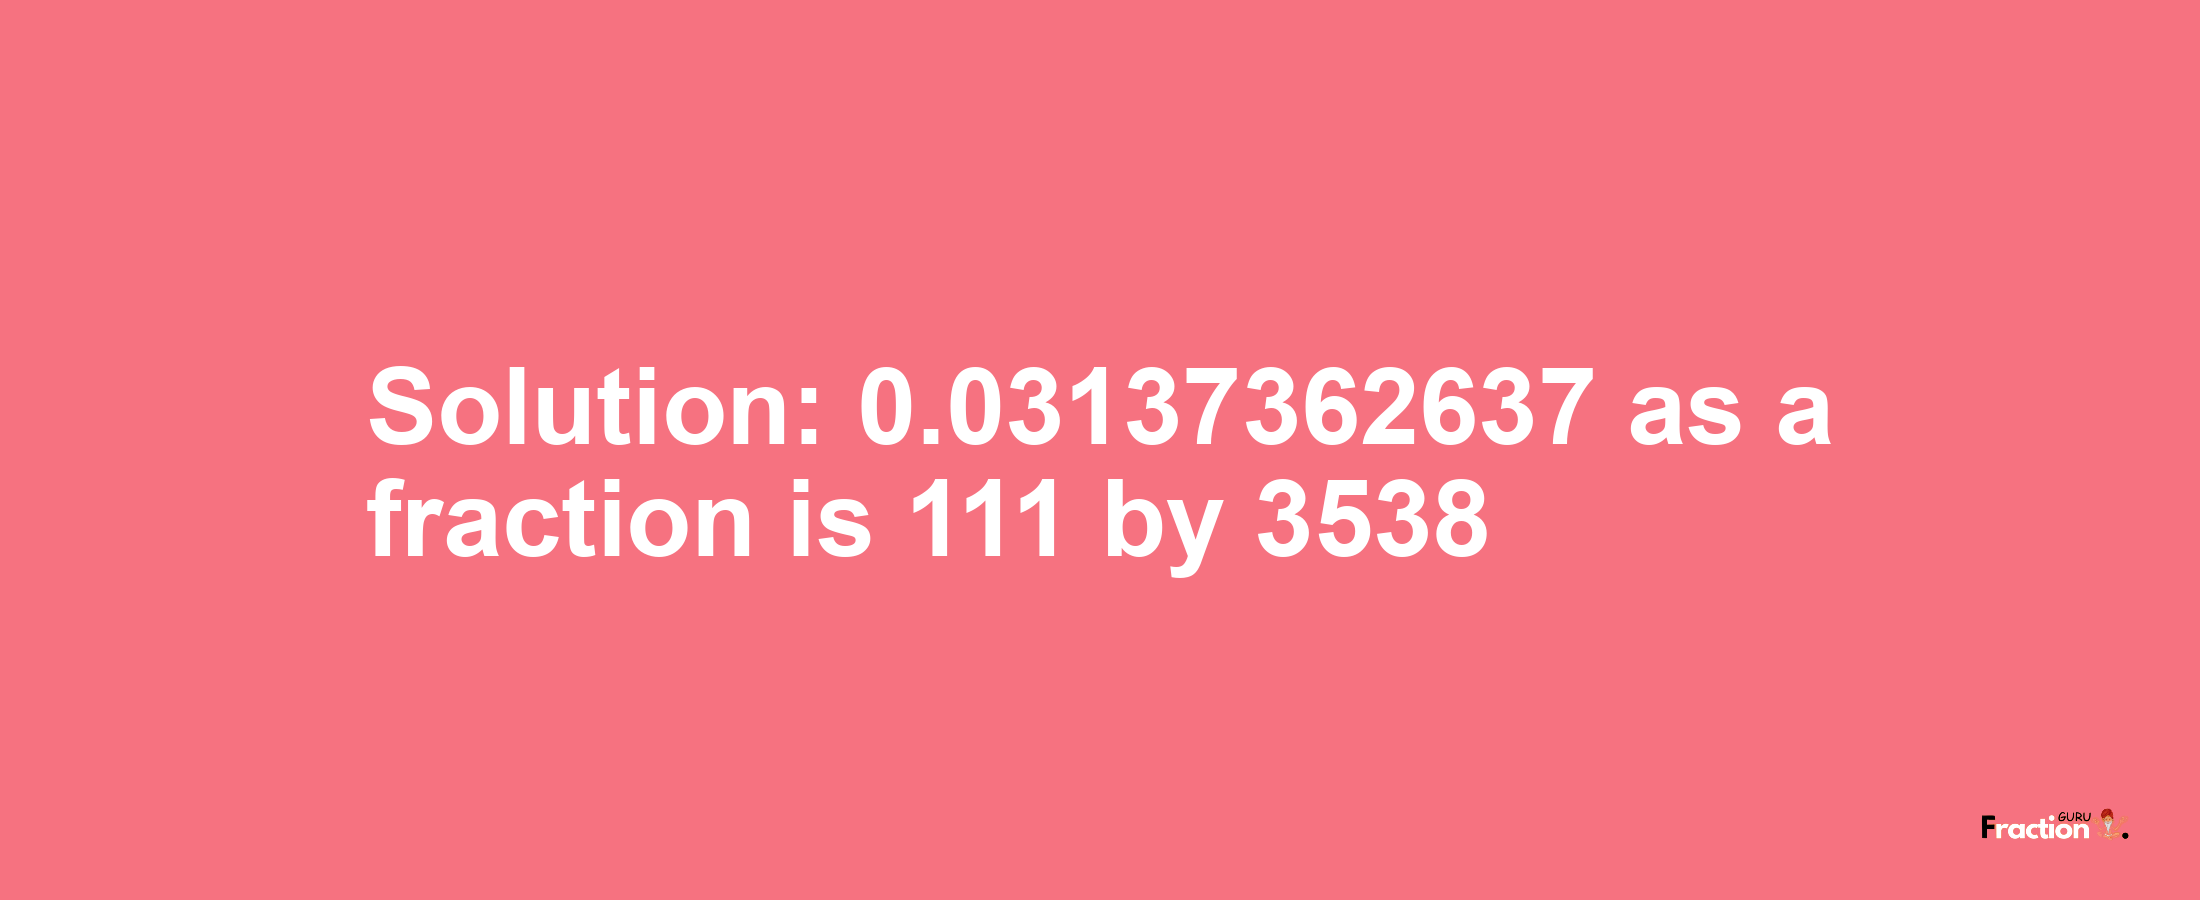 Solution:0.03137362637 as a fraction is 111/3538